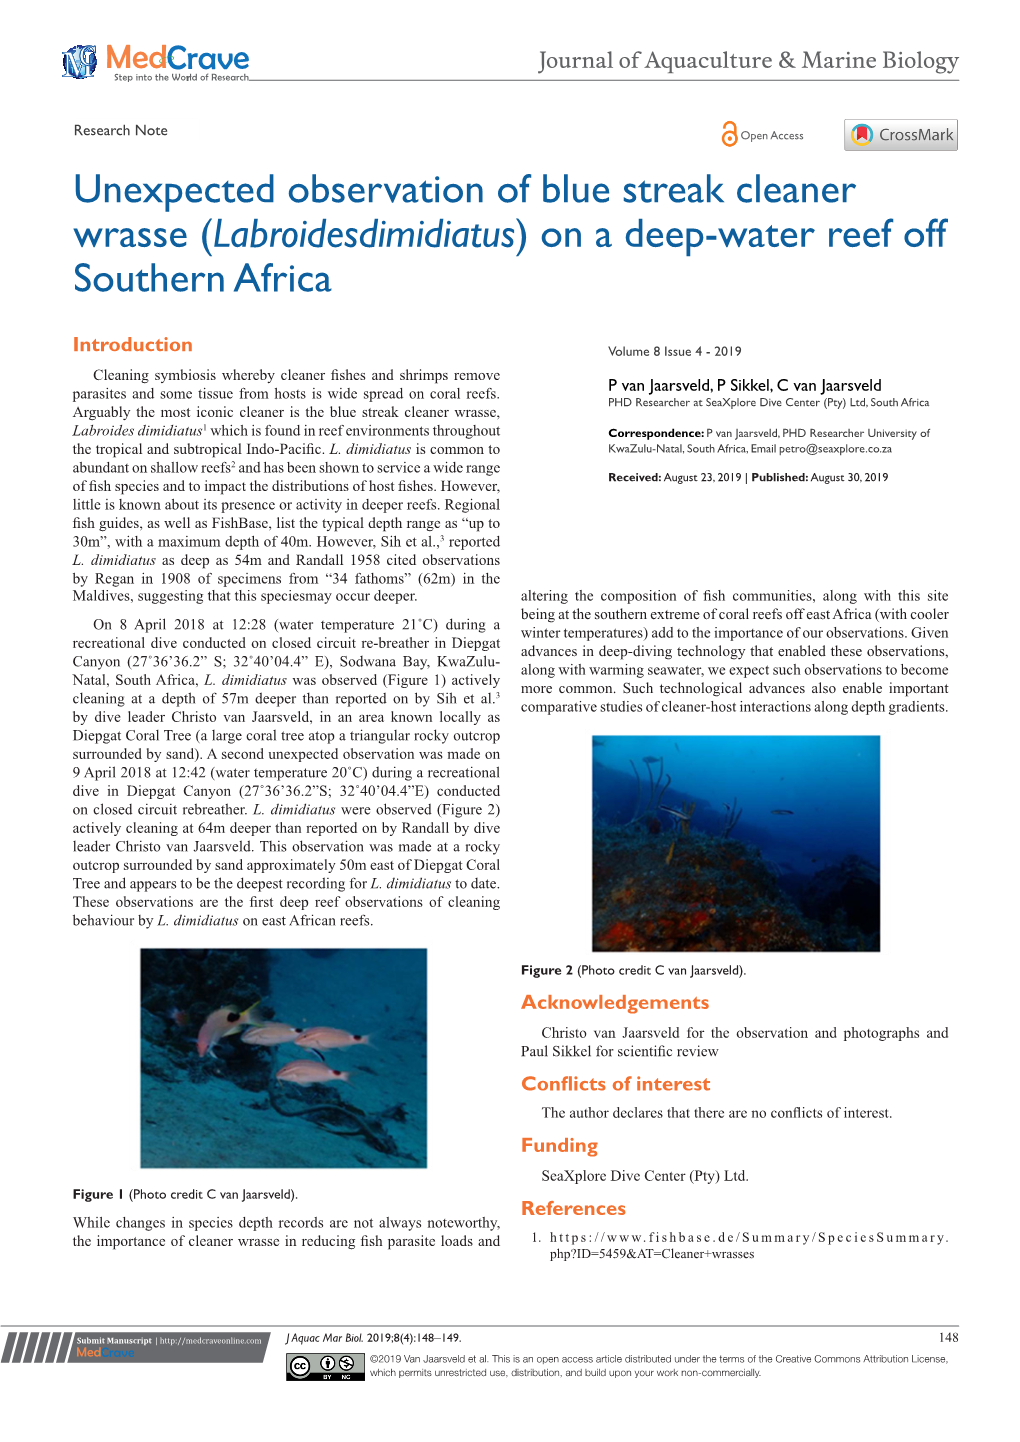 Unexpected Observation of Blue Streak Cleaner Wrasse (Labroidesdimidiatus) on a Deep-Water Reef Off Southern Africa